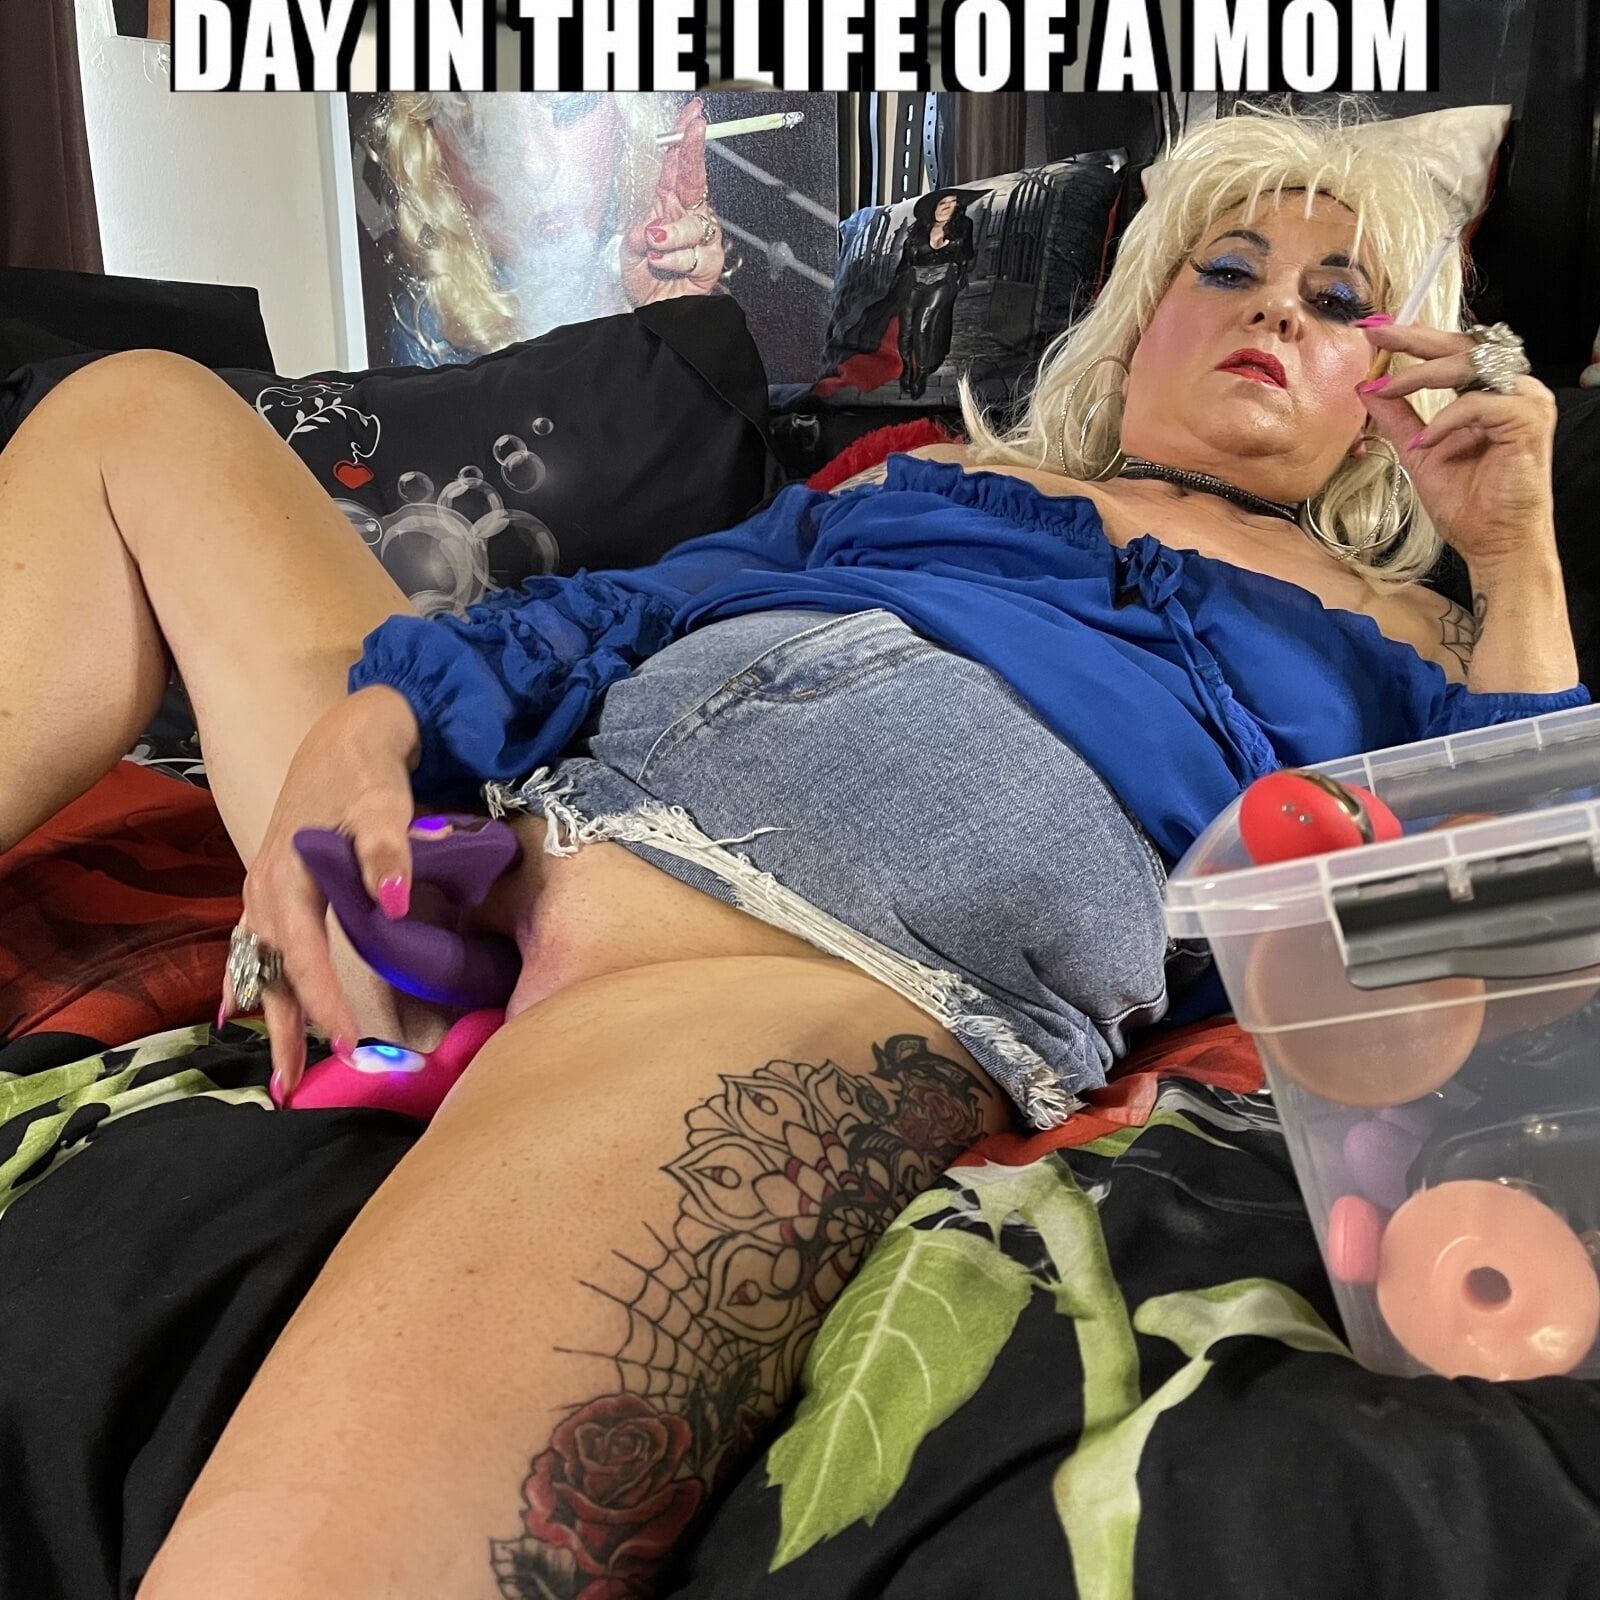 SHIRLEY THE LIFE OF A MOM #10